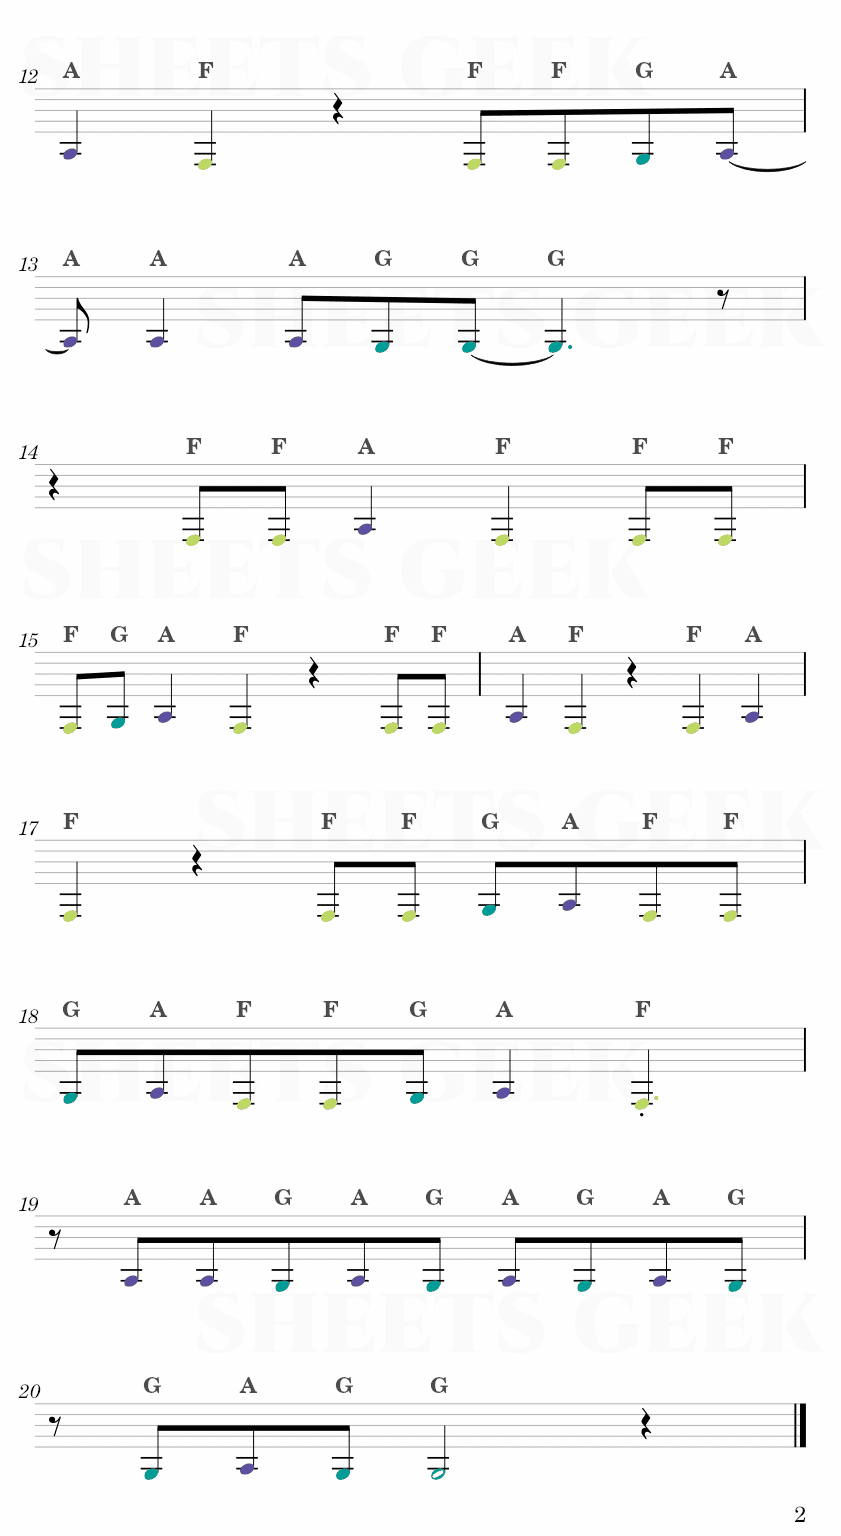 PS5 - salem ilese with TOMORROW X TOGETHER feat. Alan Walker (FORTNITE BATTLE PASS) Easy Sheet Music Free for piano, keyboard, flute, violin, sax, cello page 2